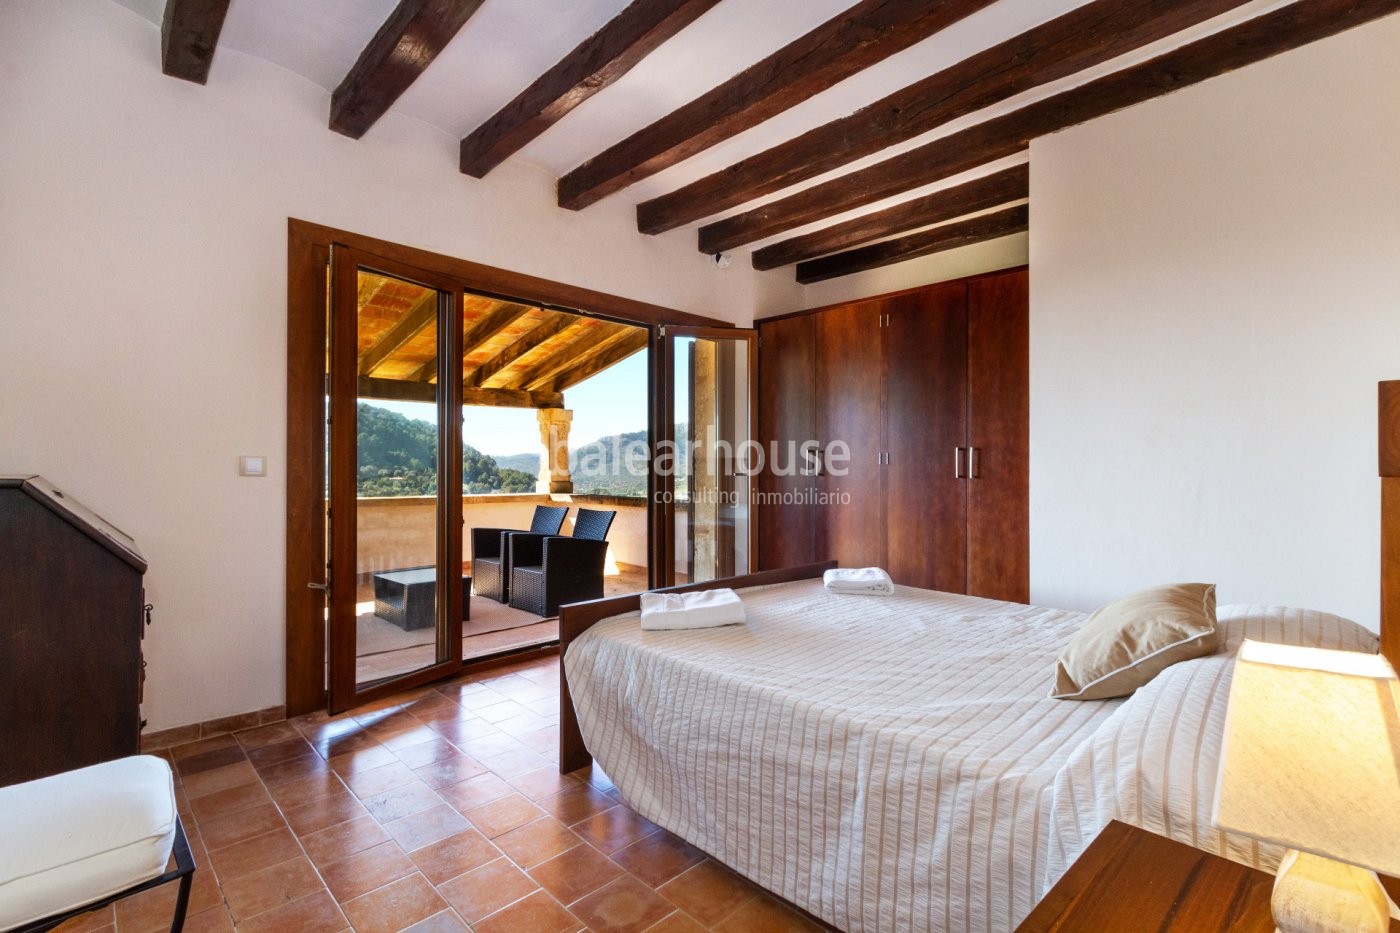 Recently renovated traditional Finca in a spectacular setting with views to the sea.